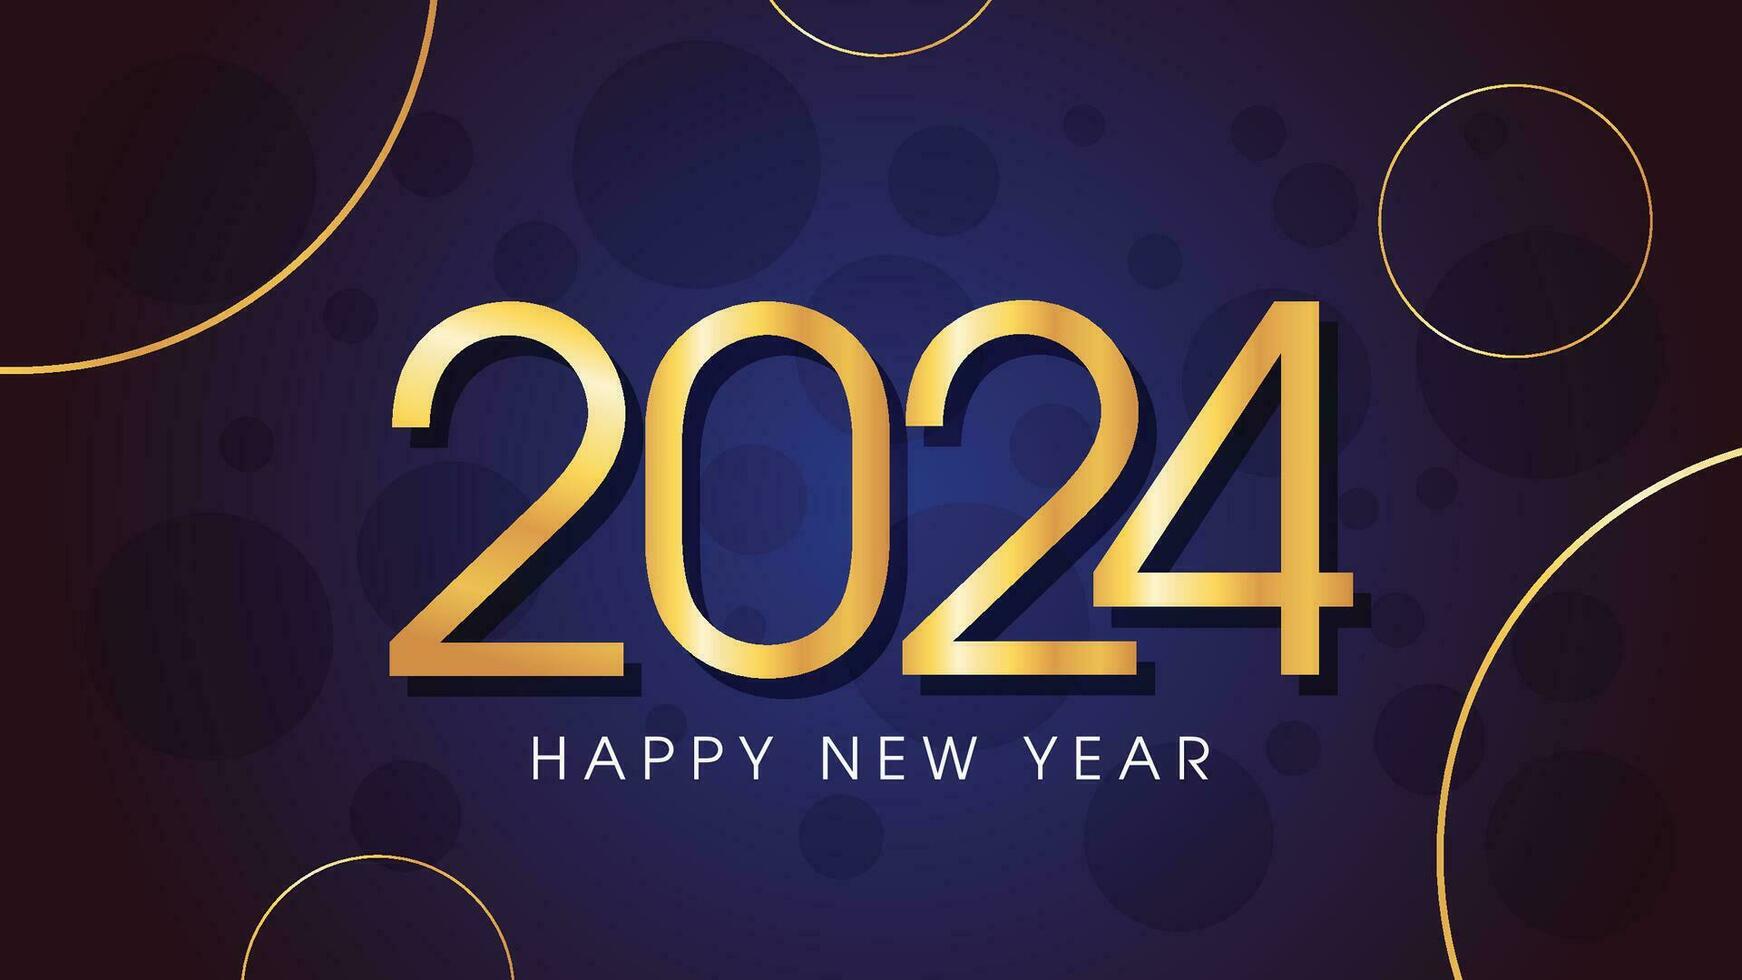 Happy New year 2024 Background Design Template vector